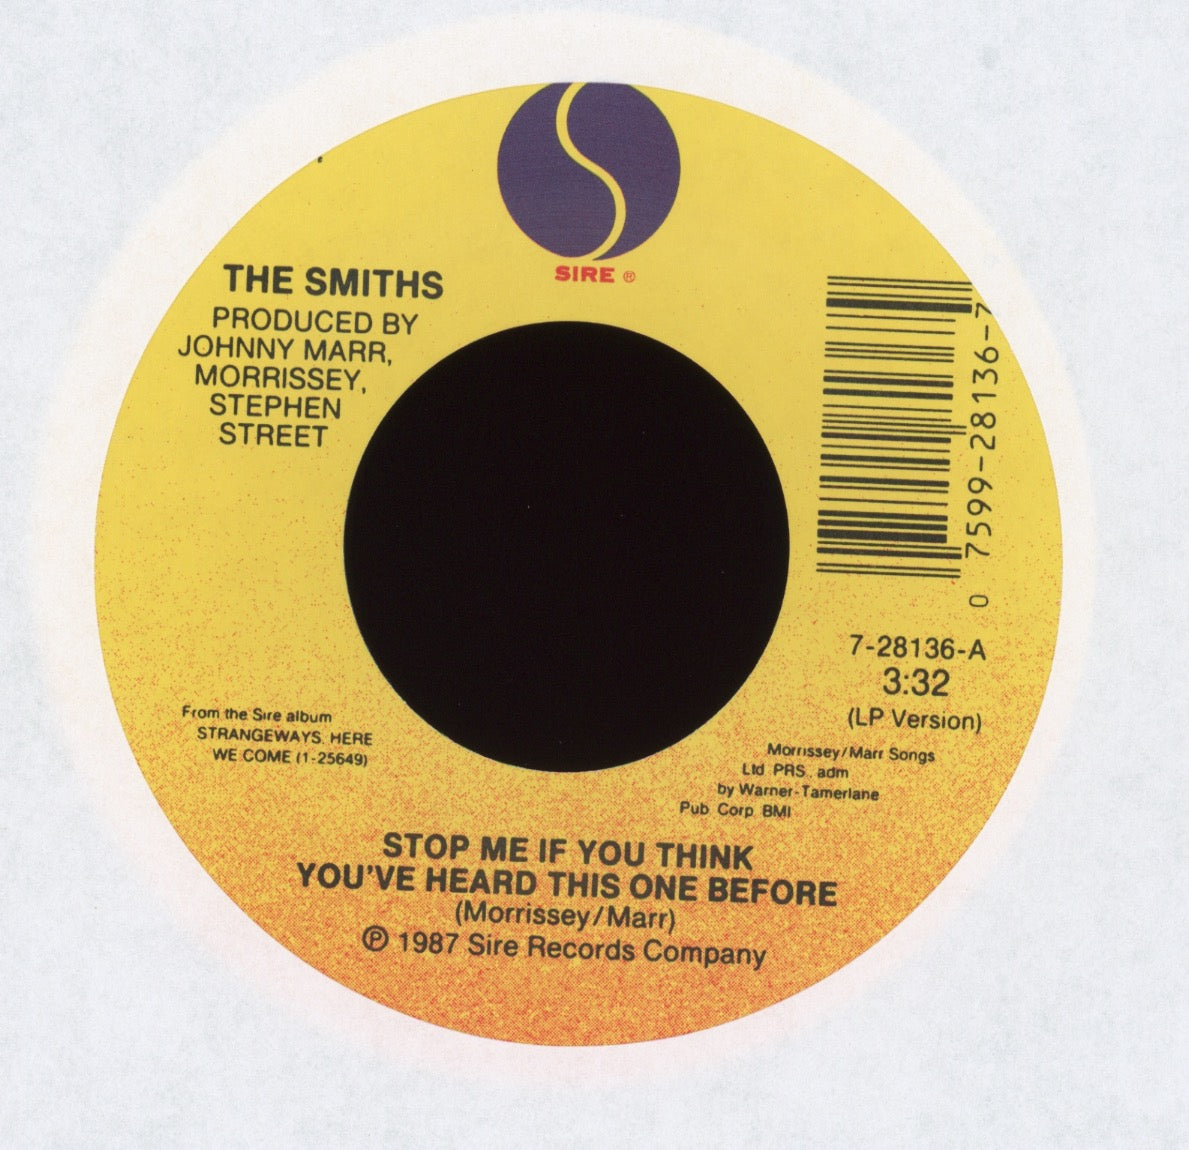 The Smiths - Stop Me If You Think You've Heard This One Before on Sire